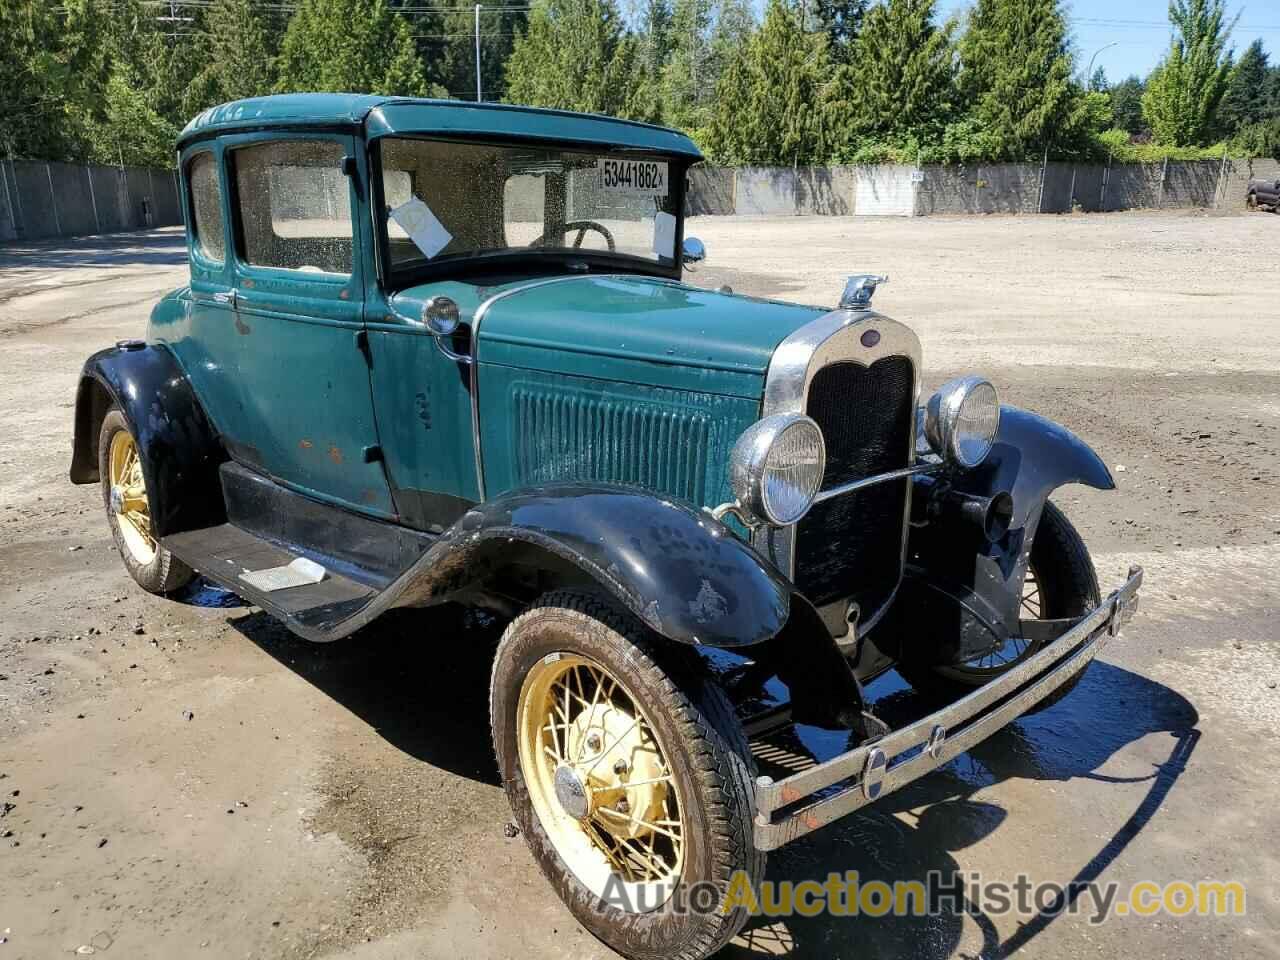 1930 FORD COUPE, WA89154956